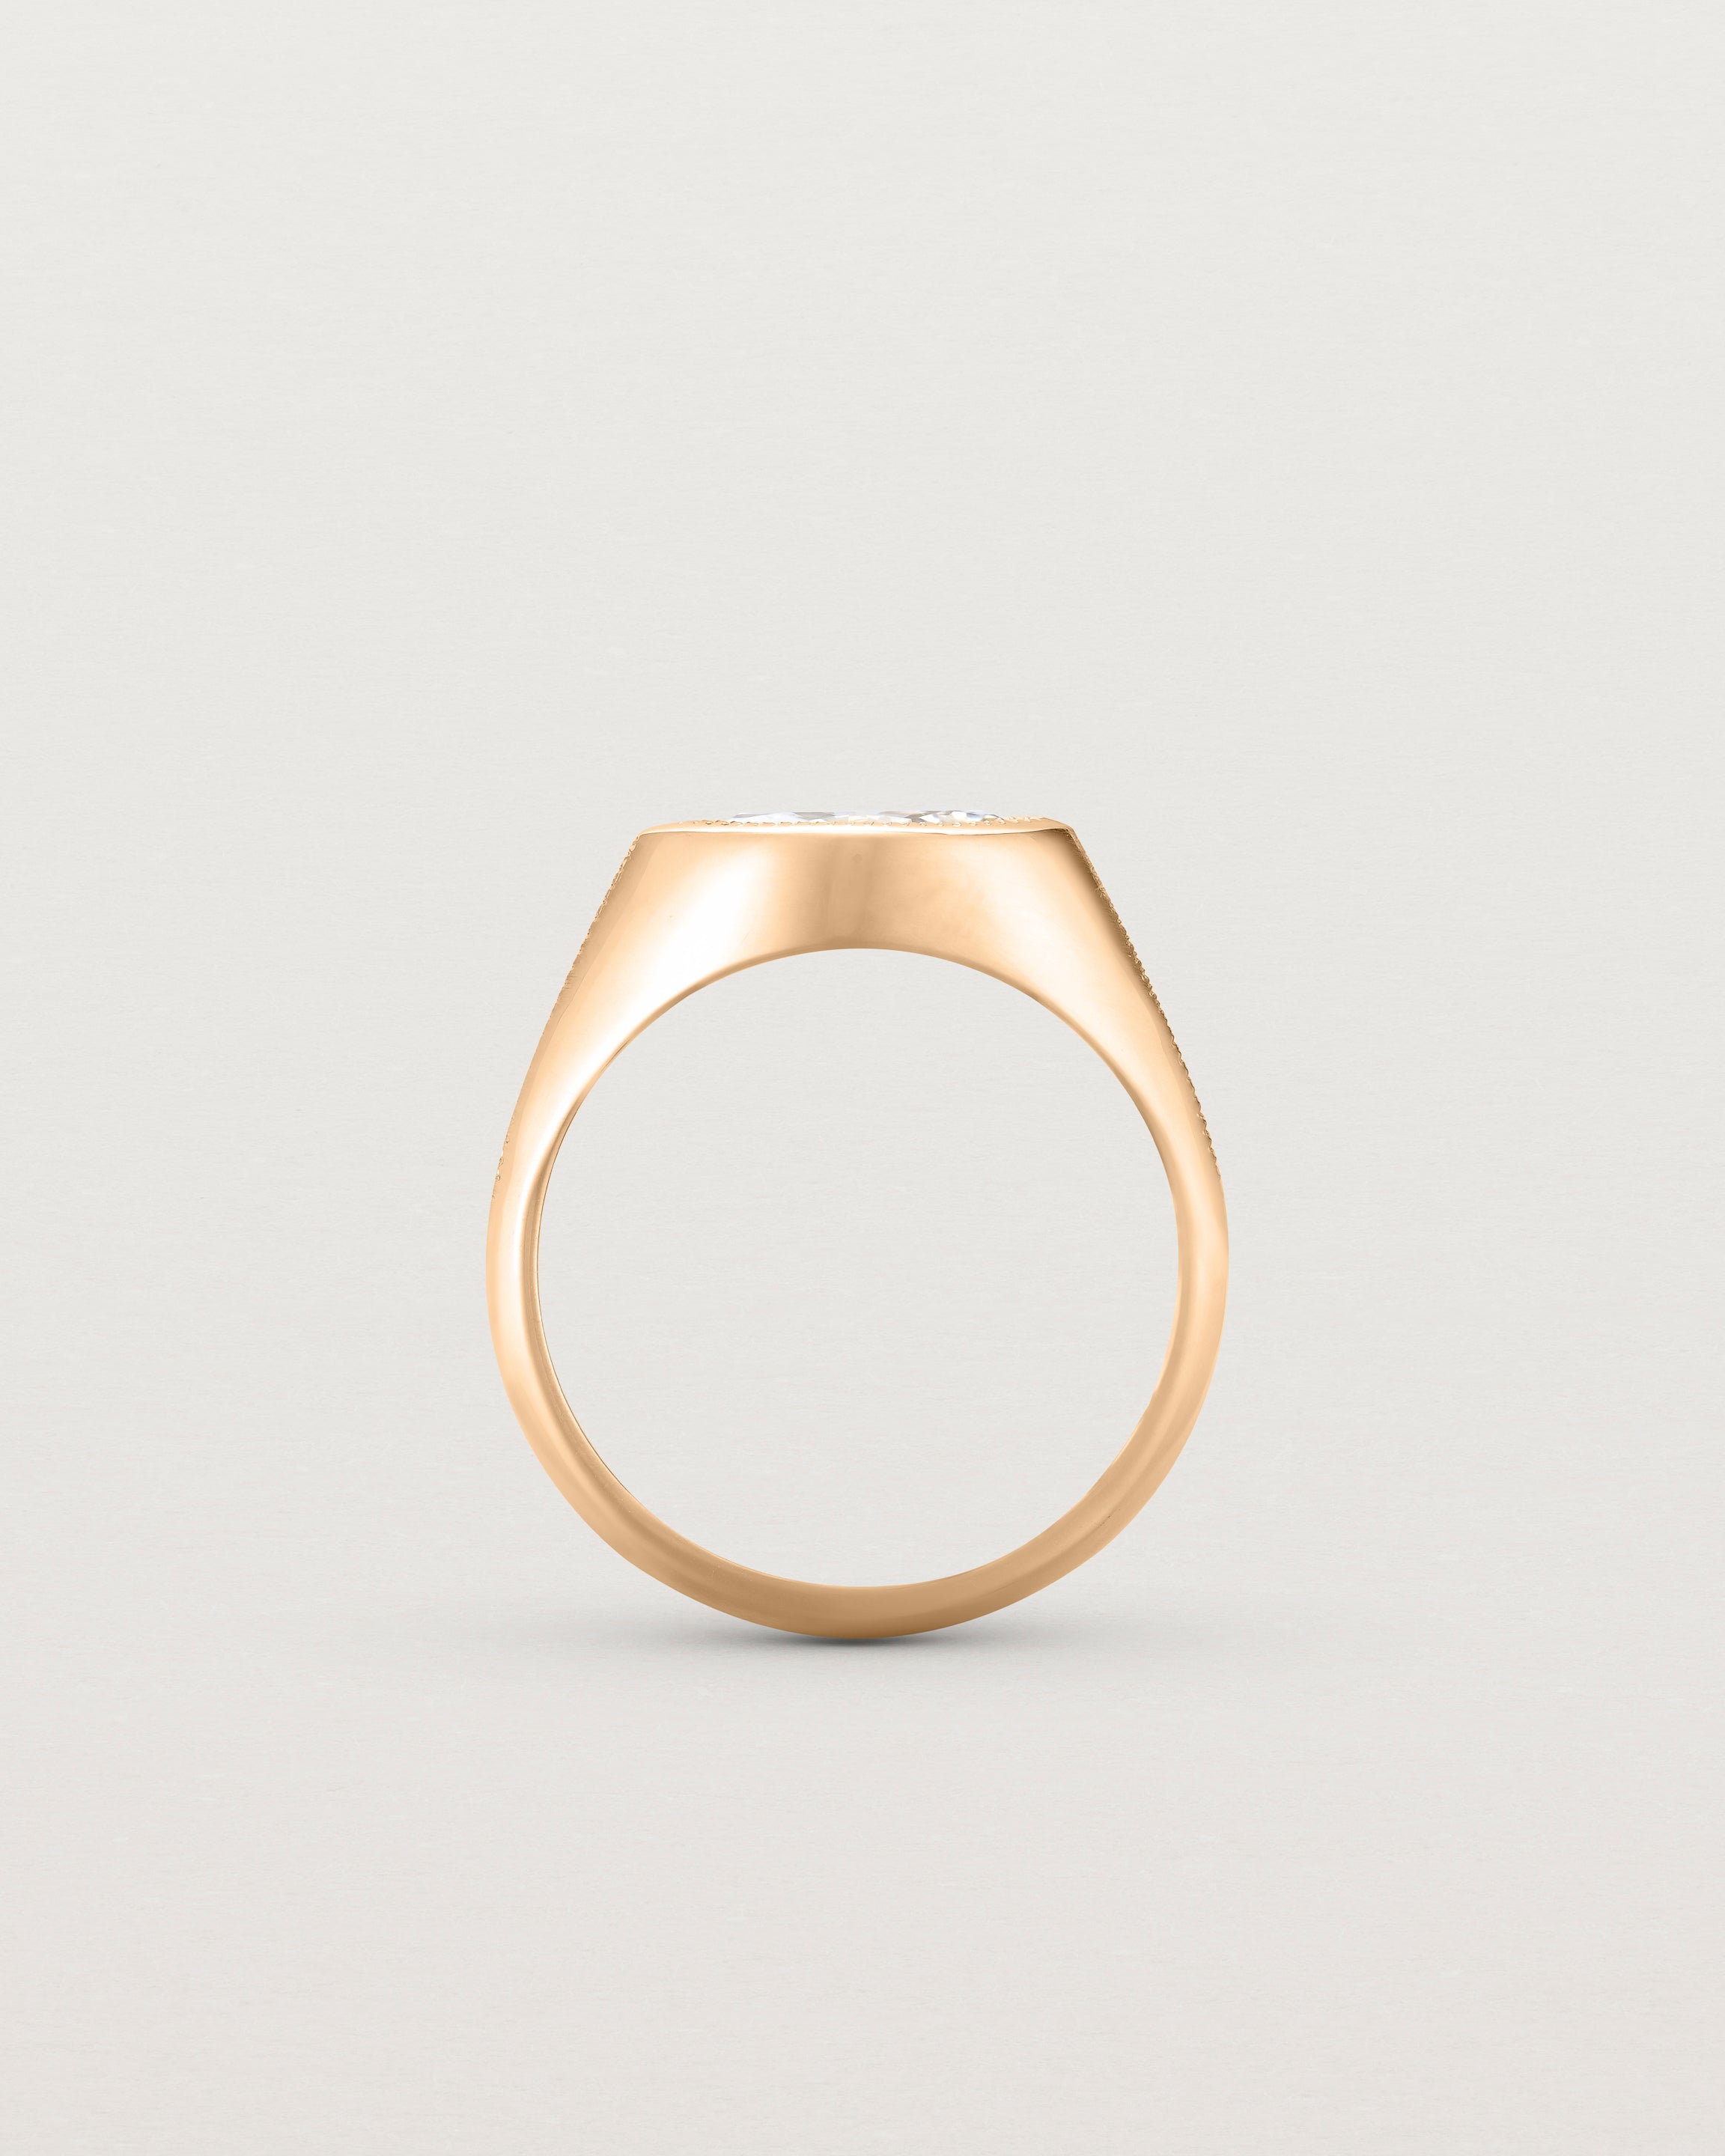 Standing view of the Átlas Marquise Signet | Laboratory Grown Diamond in rose gold, in a polished finish.